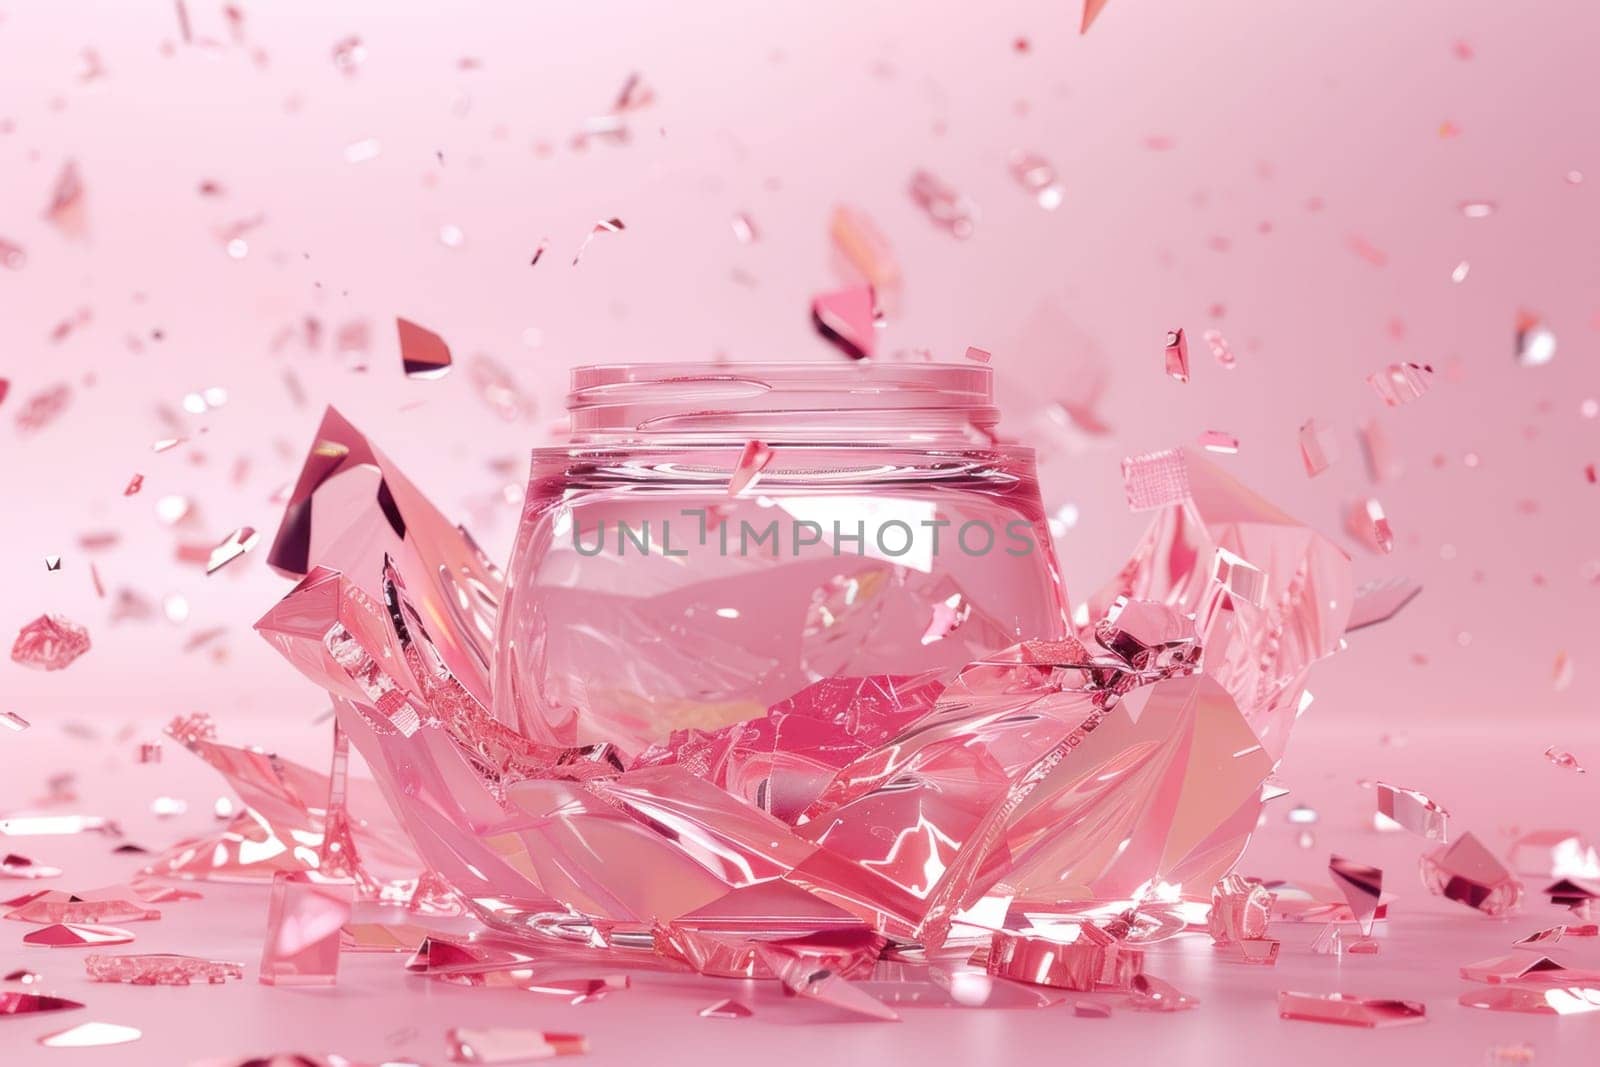 Crushed glass jar with pink confetti on a pink background for beauty, fashion, and art concept design by Vichizh